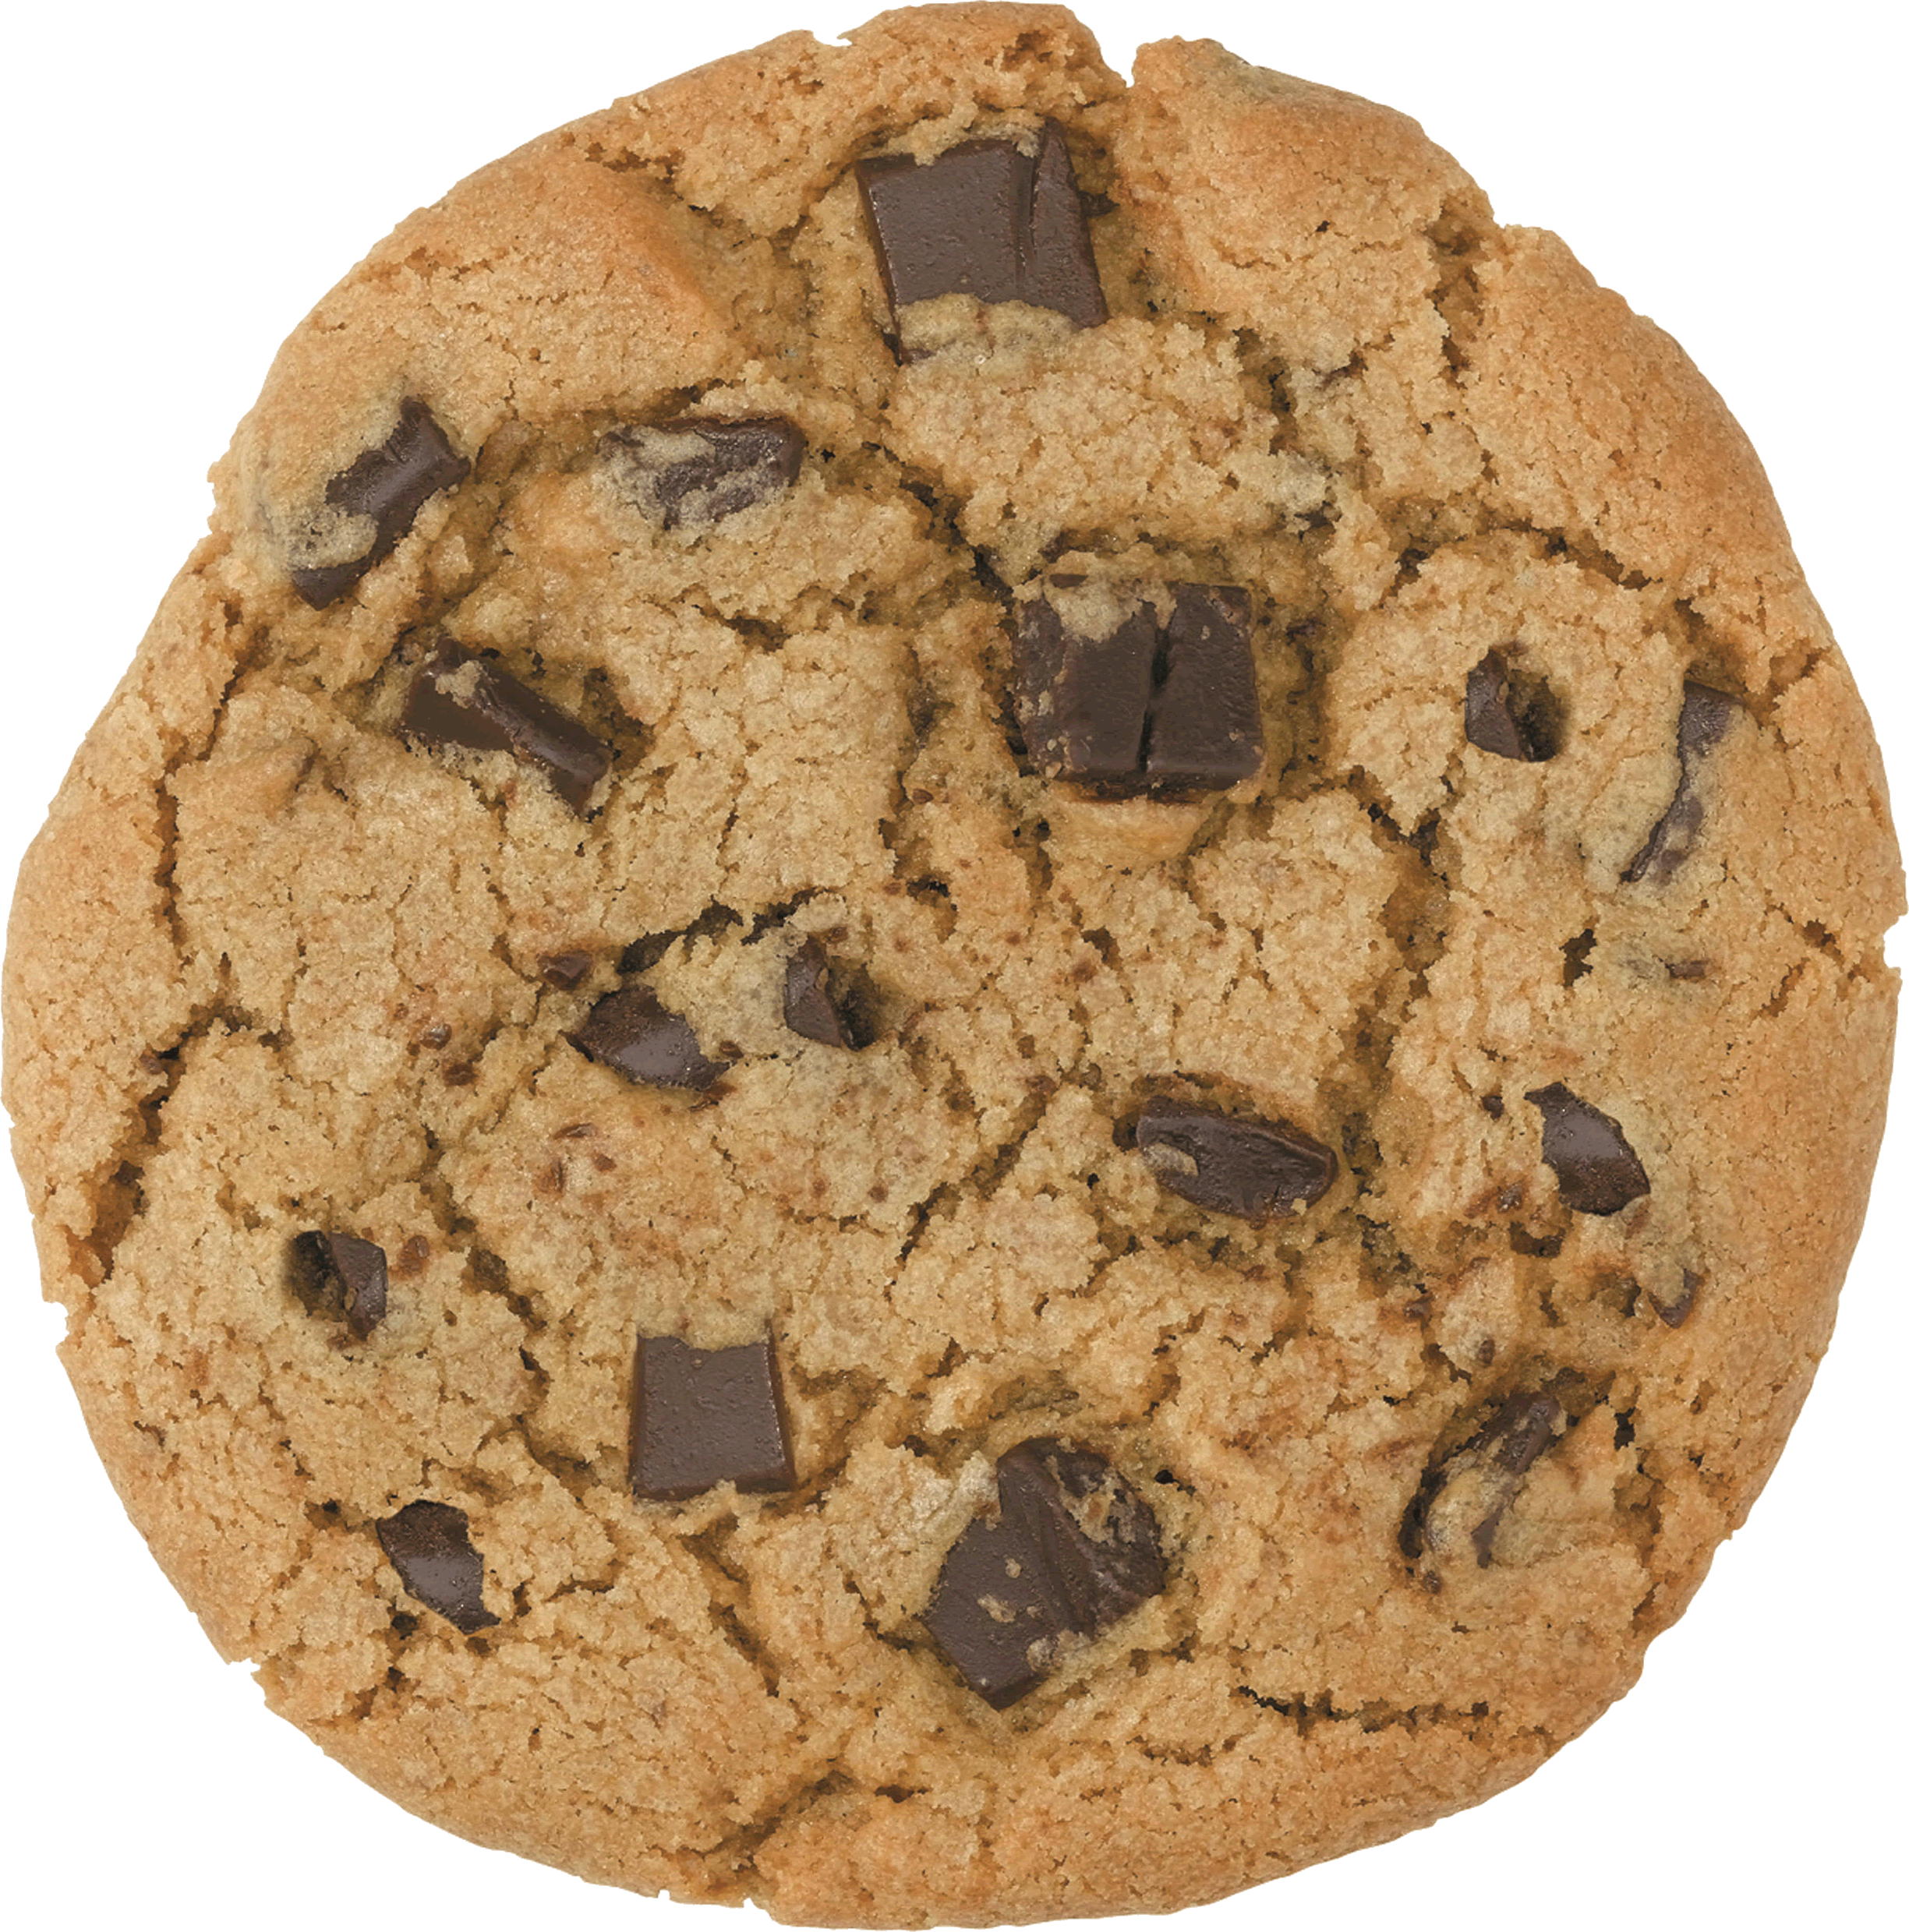 A Chocolate Chip Cookie With Chunks Of Chocolate